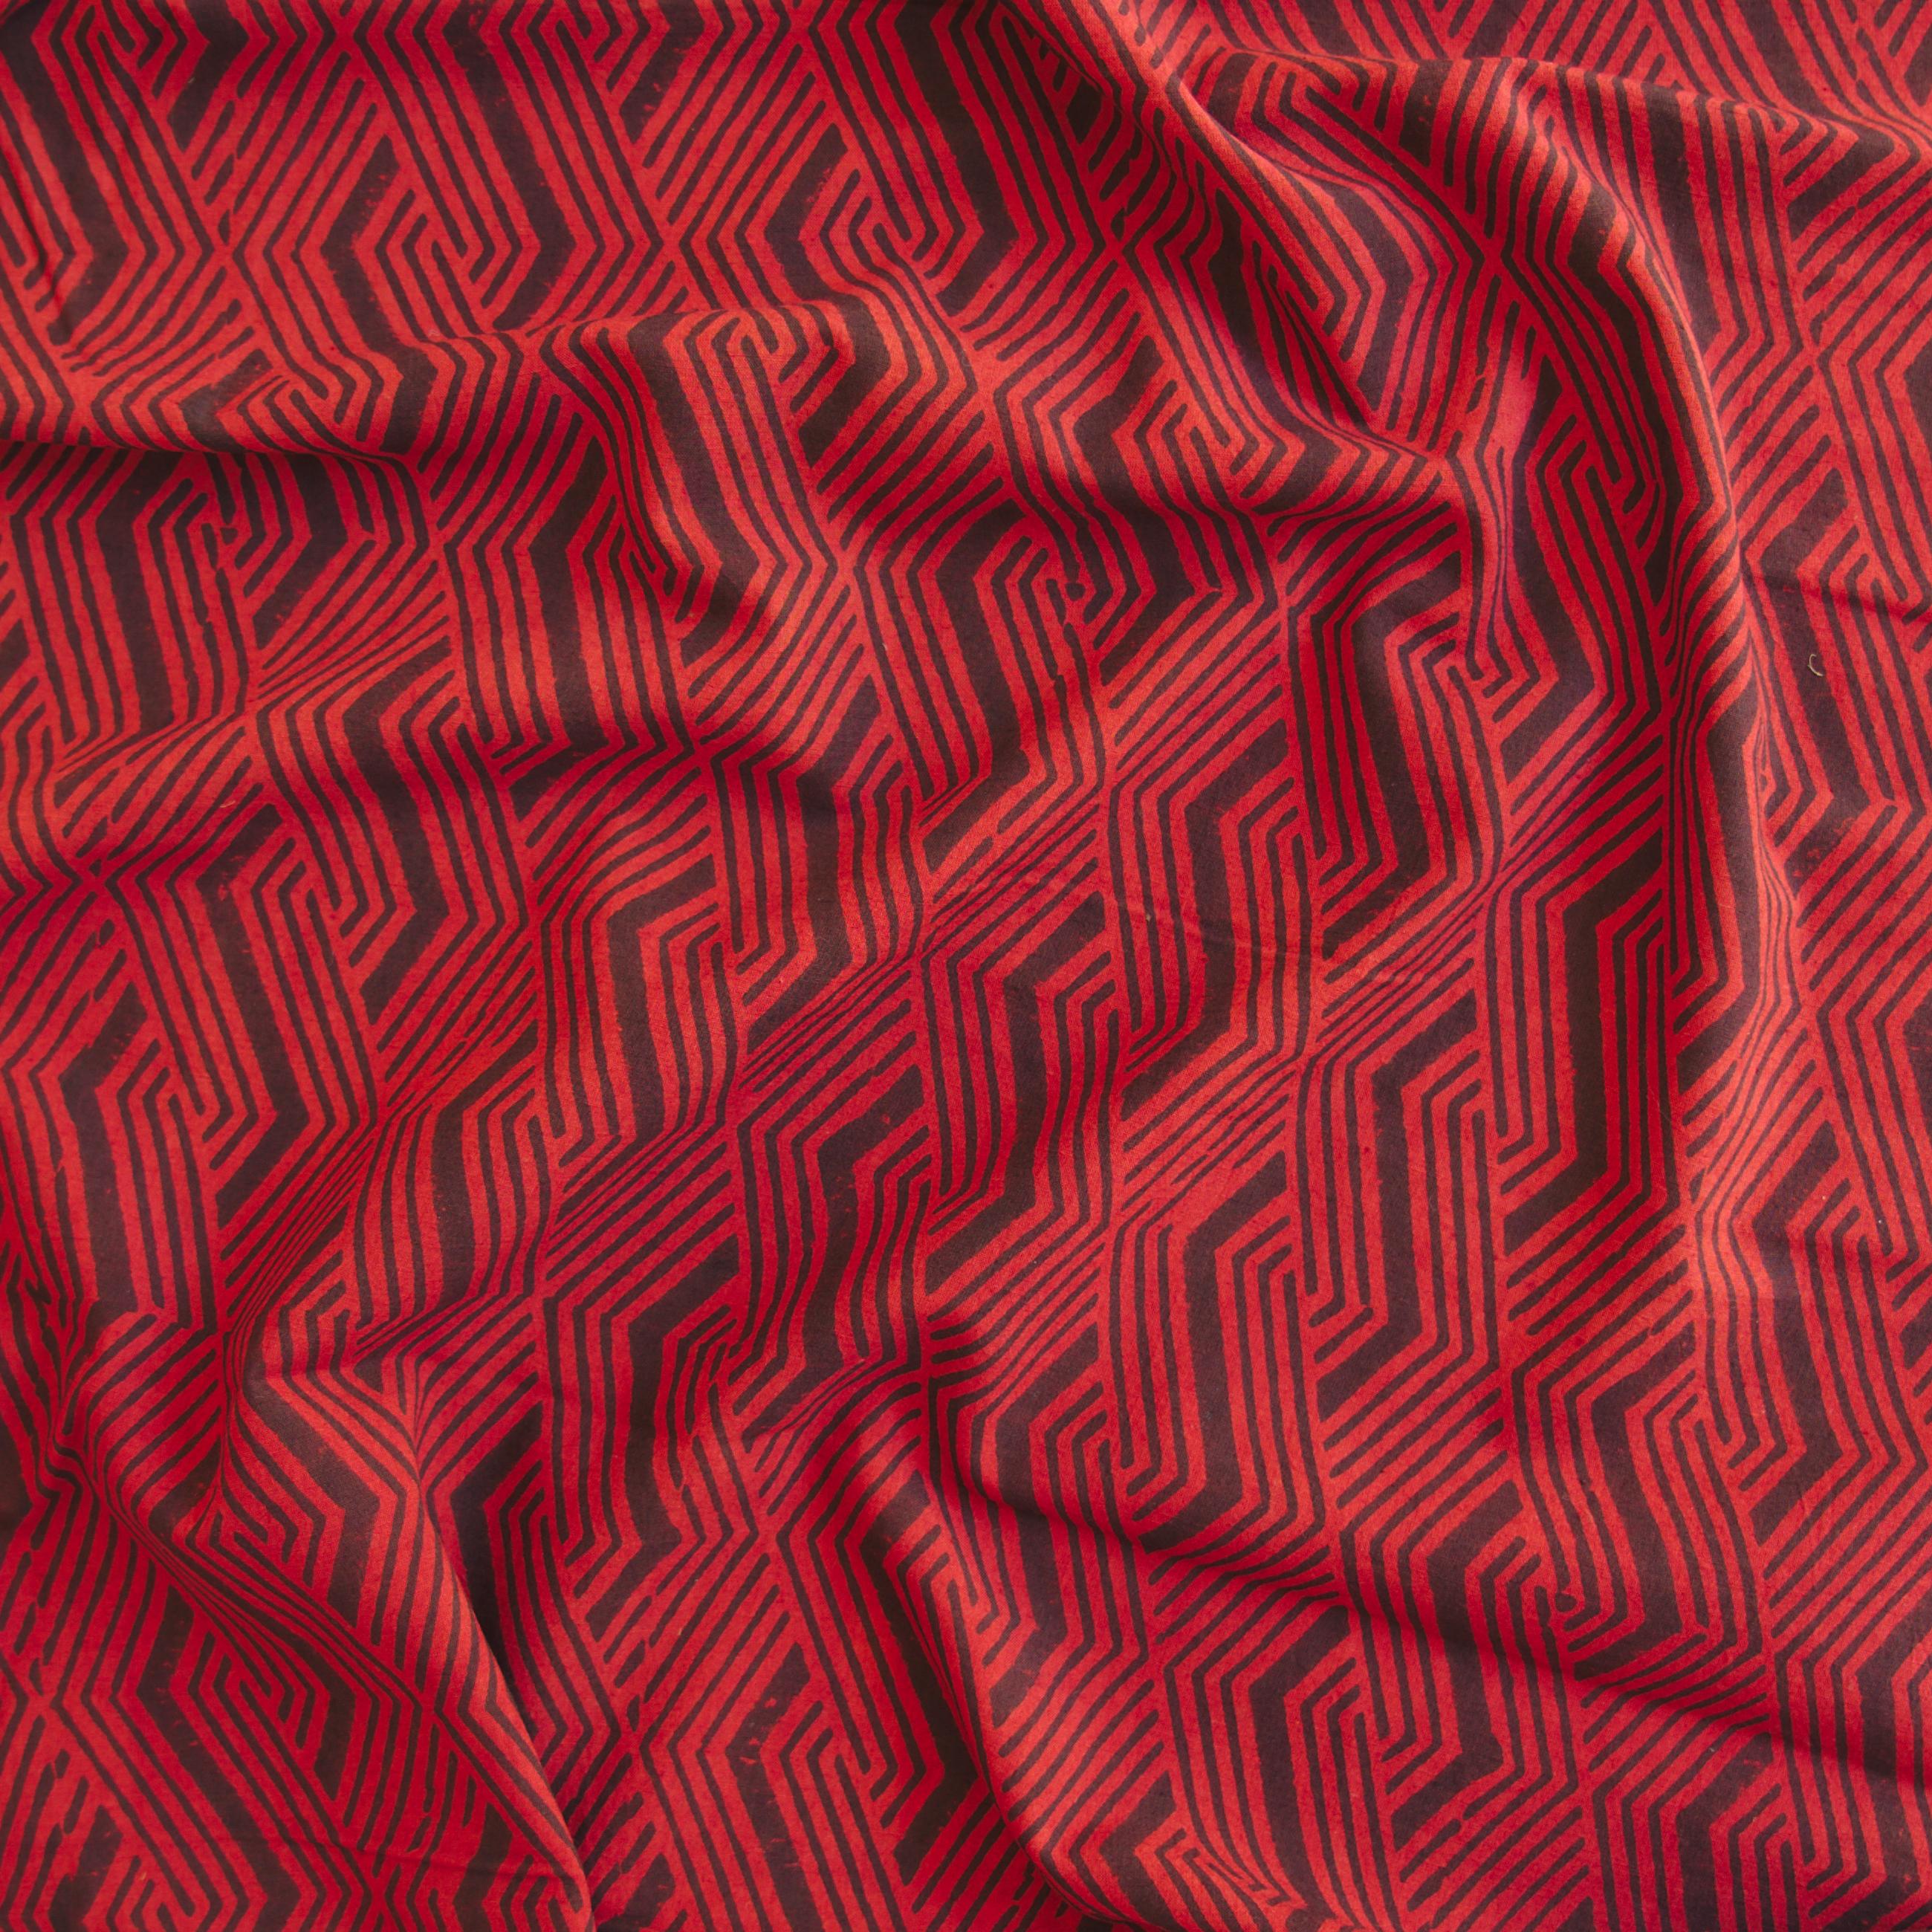 SIK26 - Indian Block-Printed Cotton Fabric - Brick & Mortar Design - Black Iron and Red Alizarin Dye - Contrast